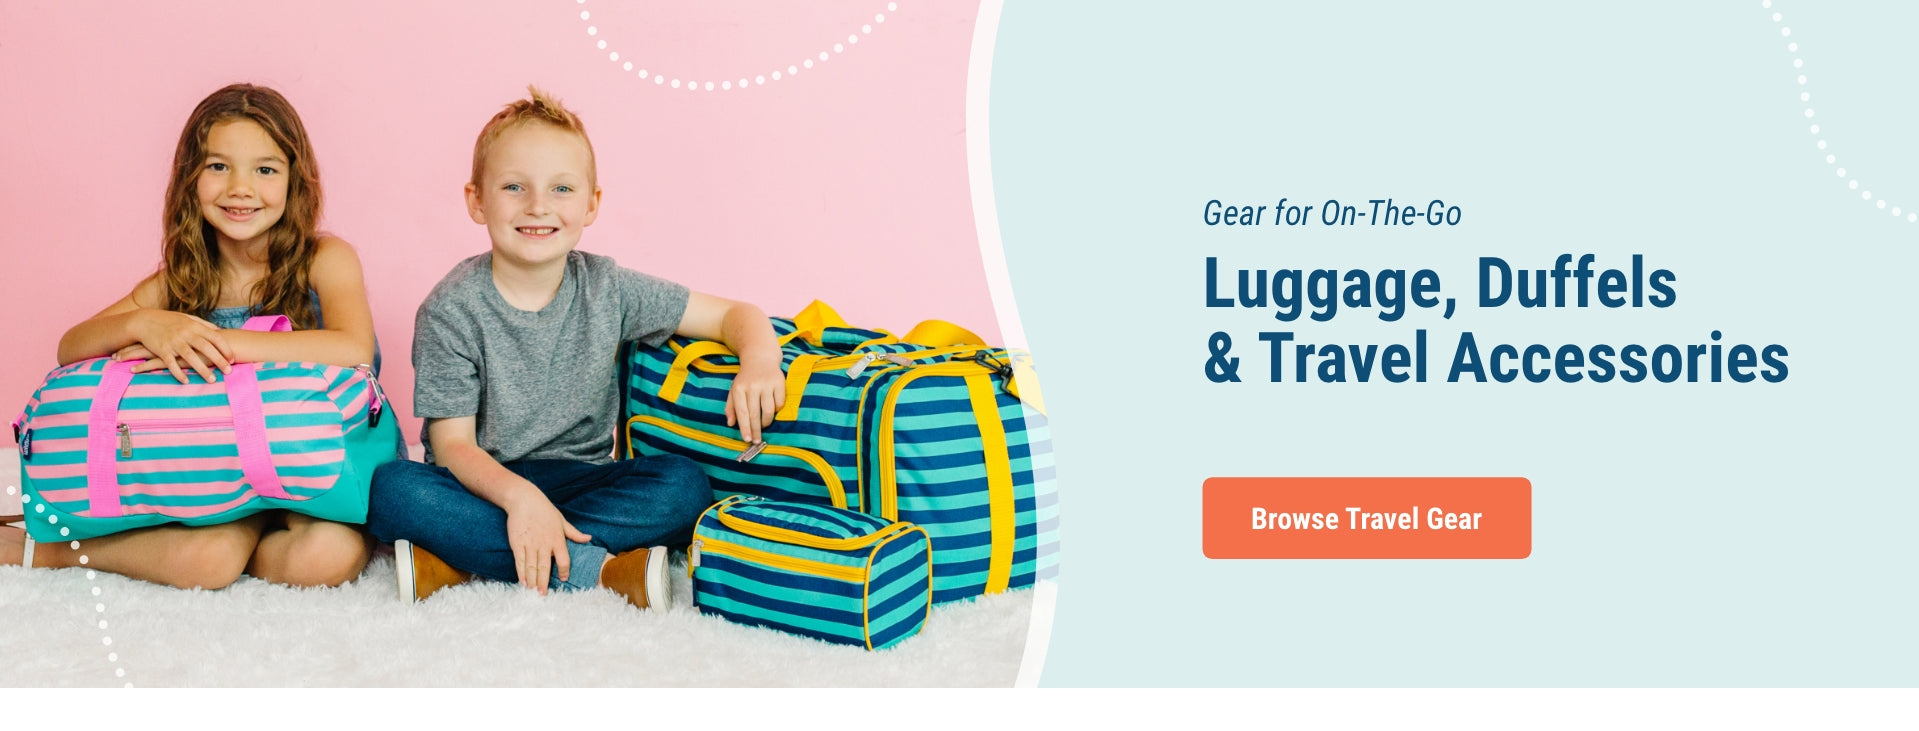 Image of girl and boy sitting with striped duffel bags. Gear for On-The-Go. Luggage, Duffel, & Travel Accessories. Link to Browse Travel Gear.